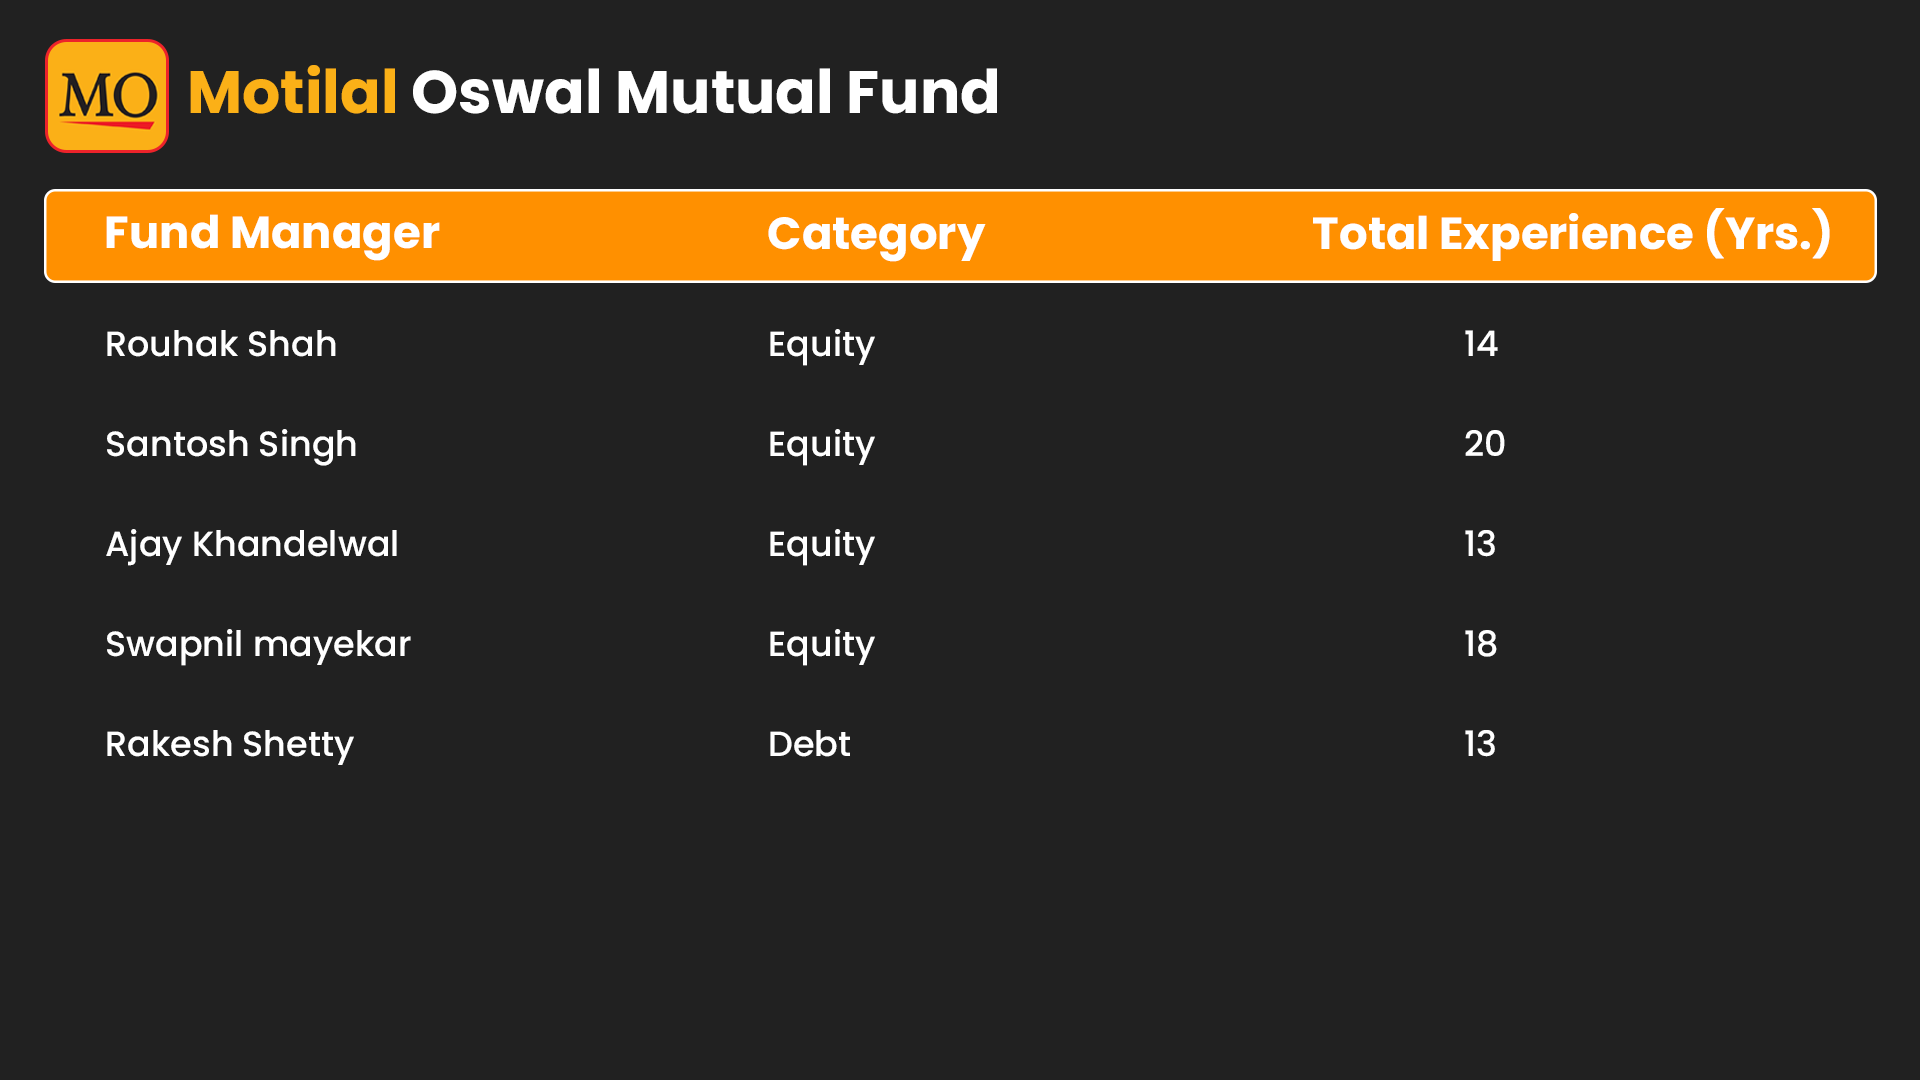 List of Fund Managers Motilal Oswal Mutual Fund